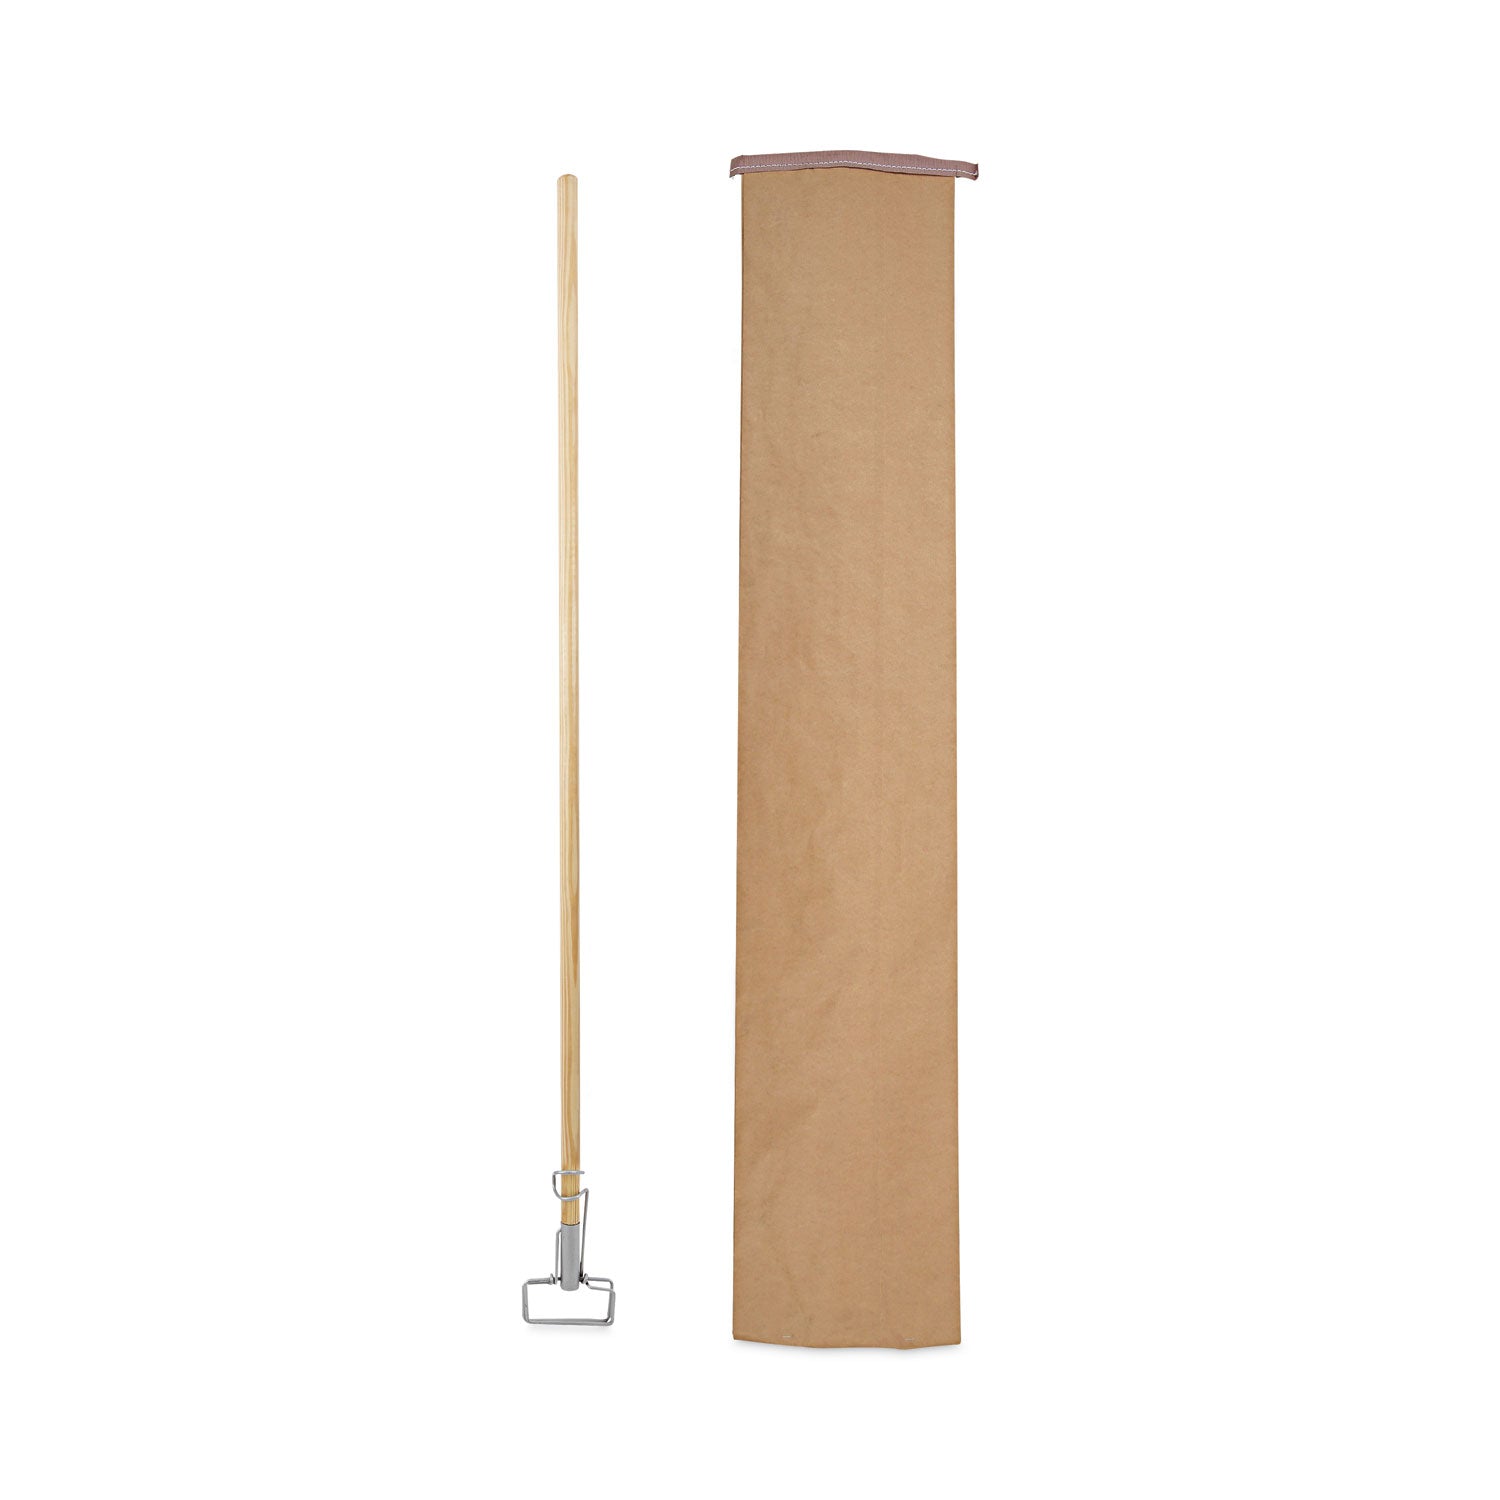 Spring Grip Metal Head Mop Handle for Most Mop Heads, Wood, 60", Natural - 